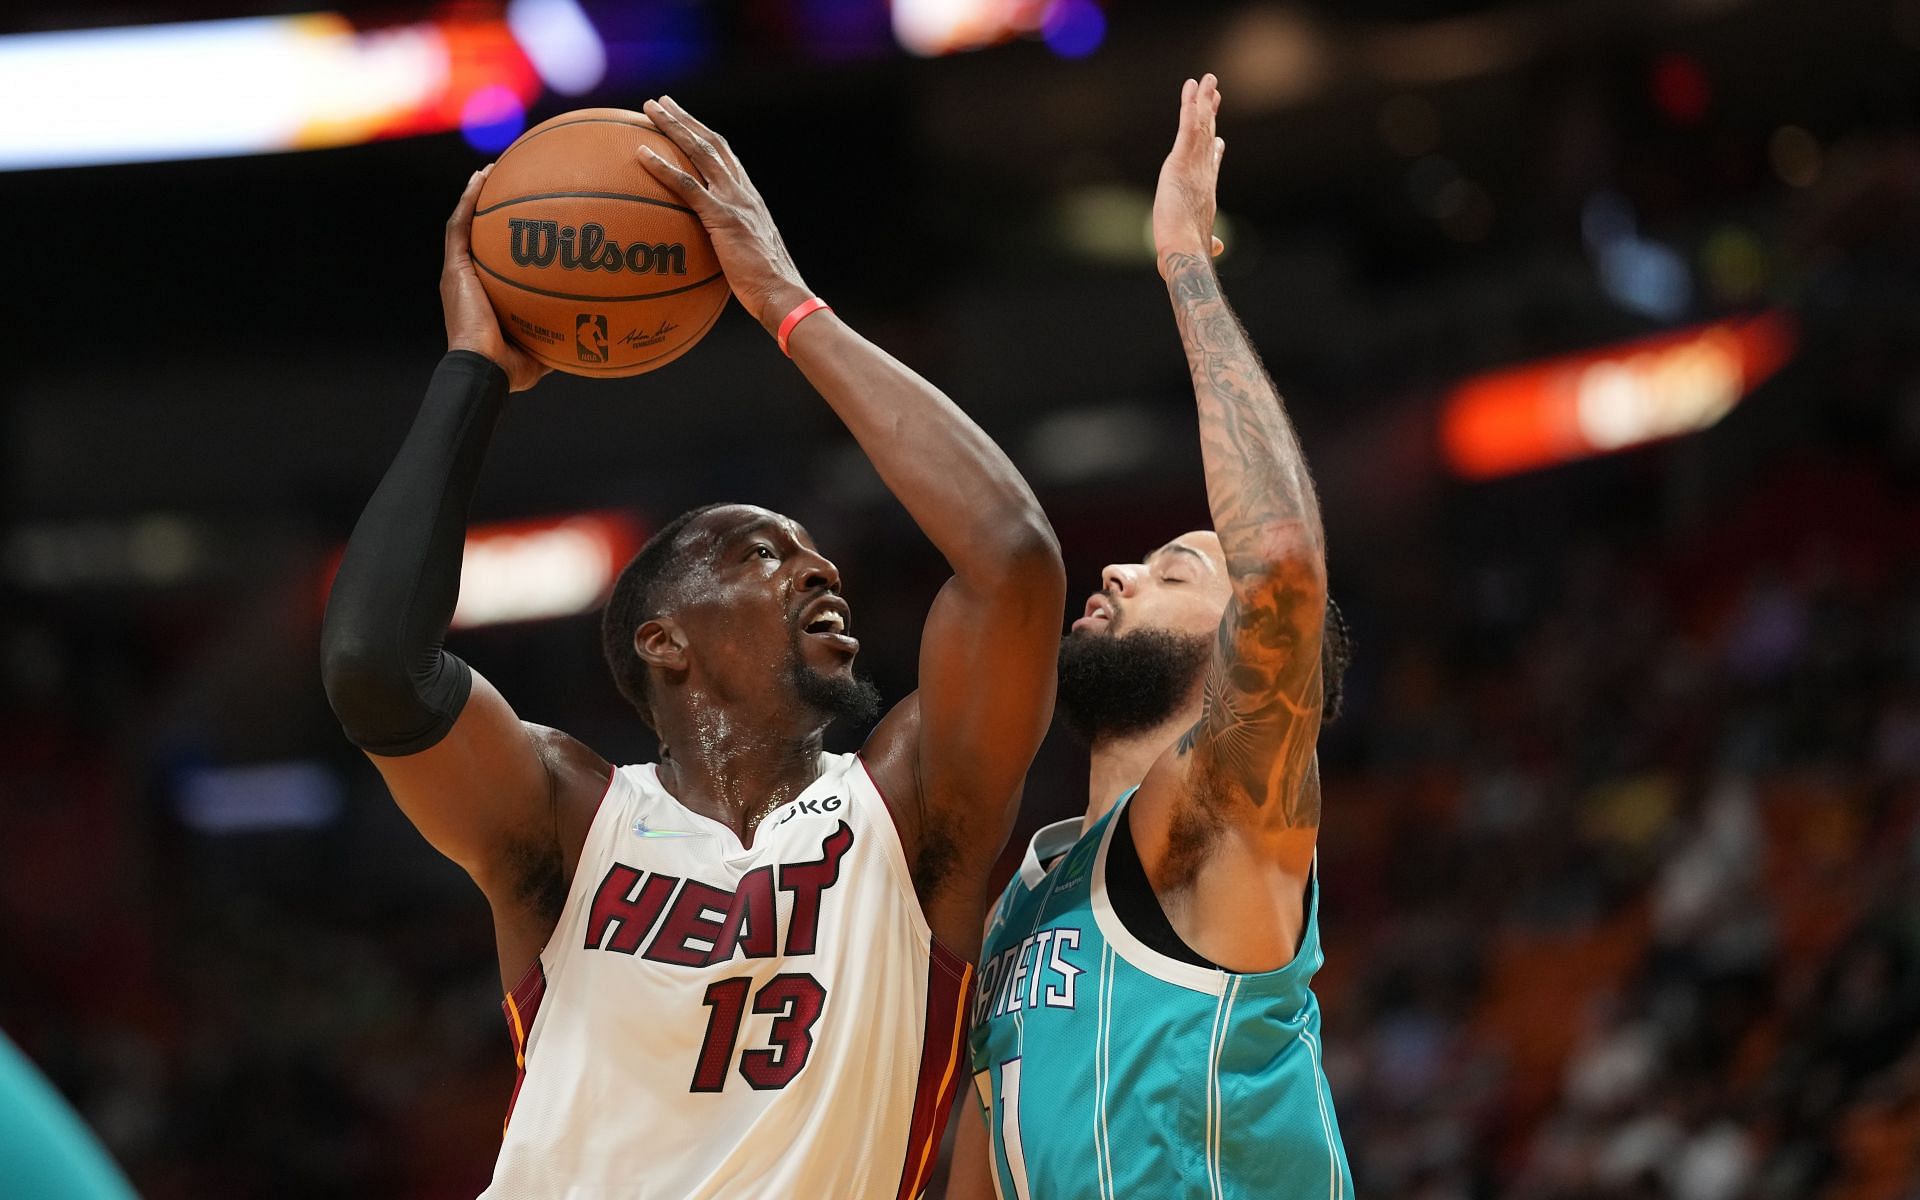 Bam Adebayo #13 of the Miami Heat drives to the basket against the Cody Martin #11 of the Charlotte Hornets int he first quarter during the preseason game at FTX Arena on October 11, 2021 in Miami, Florida.